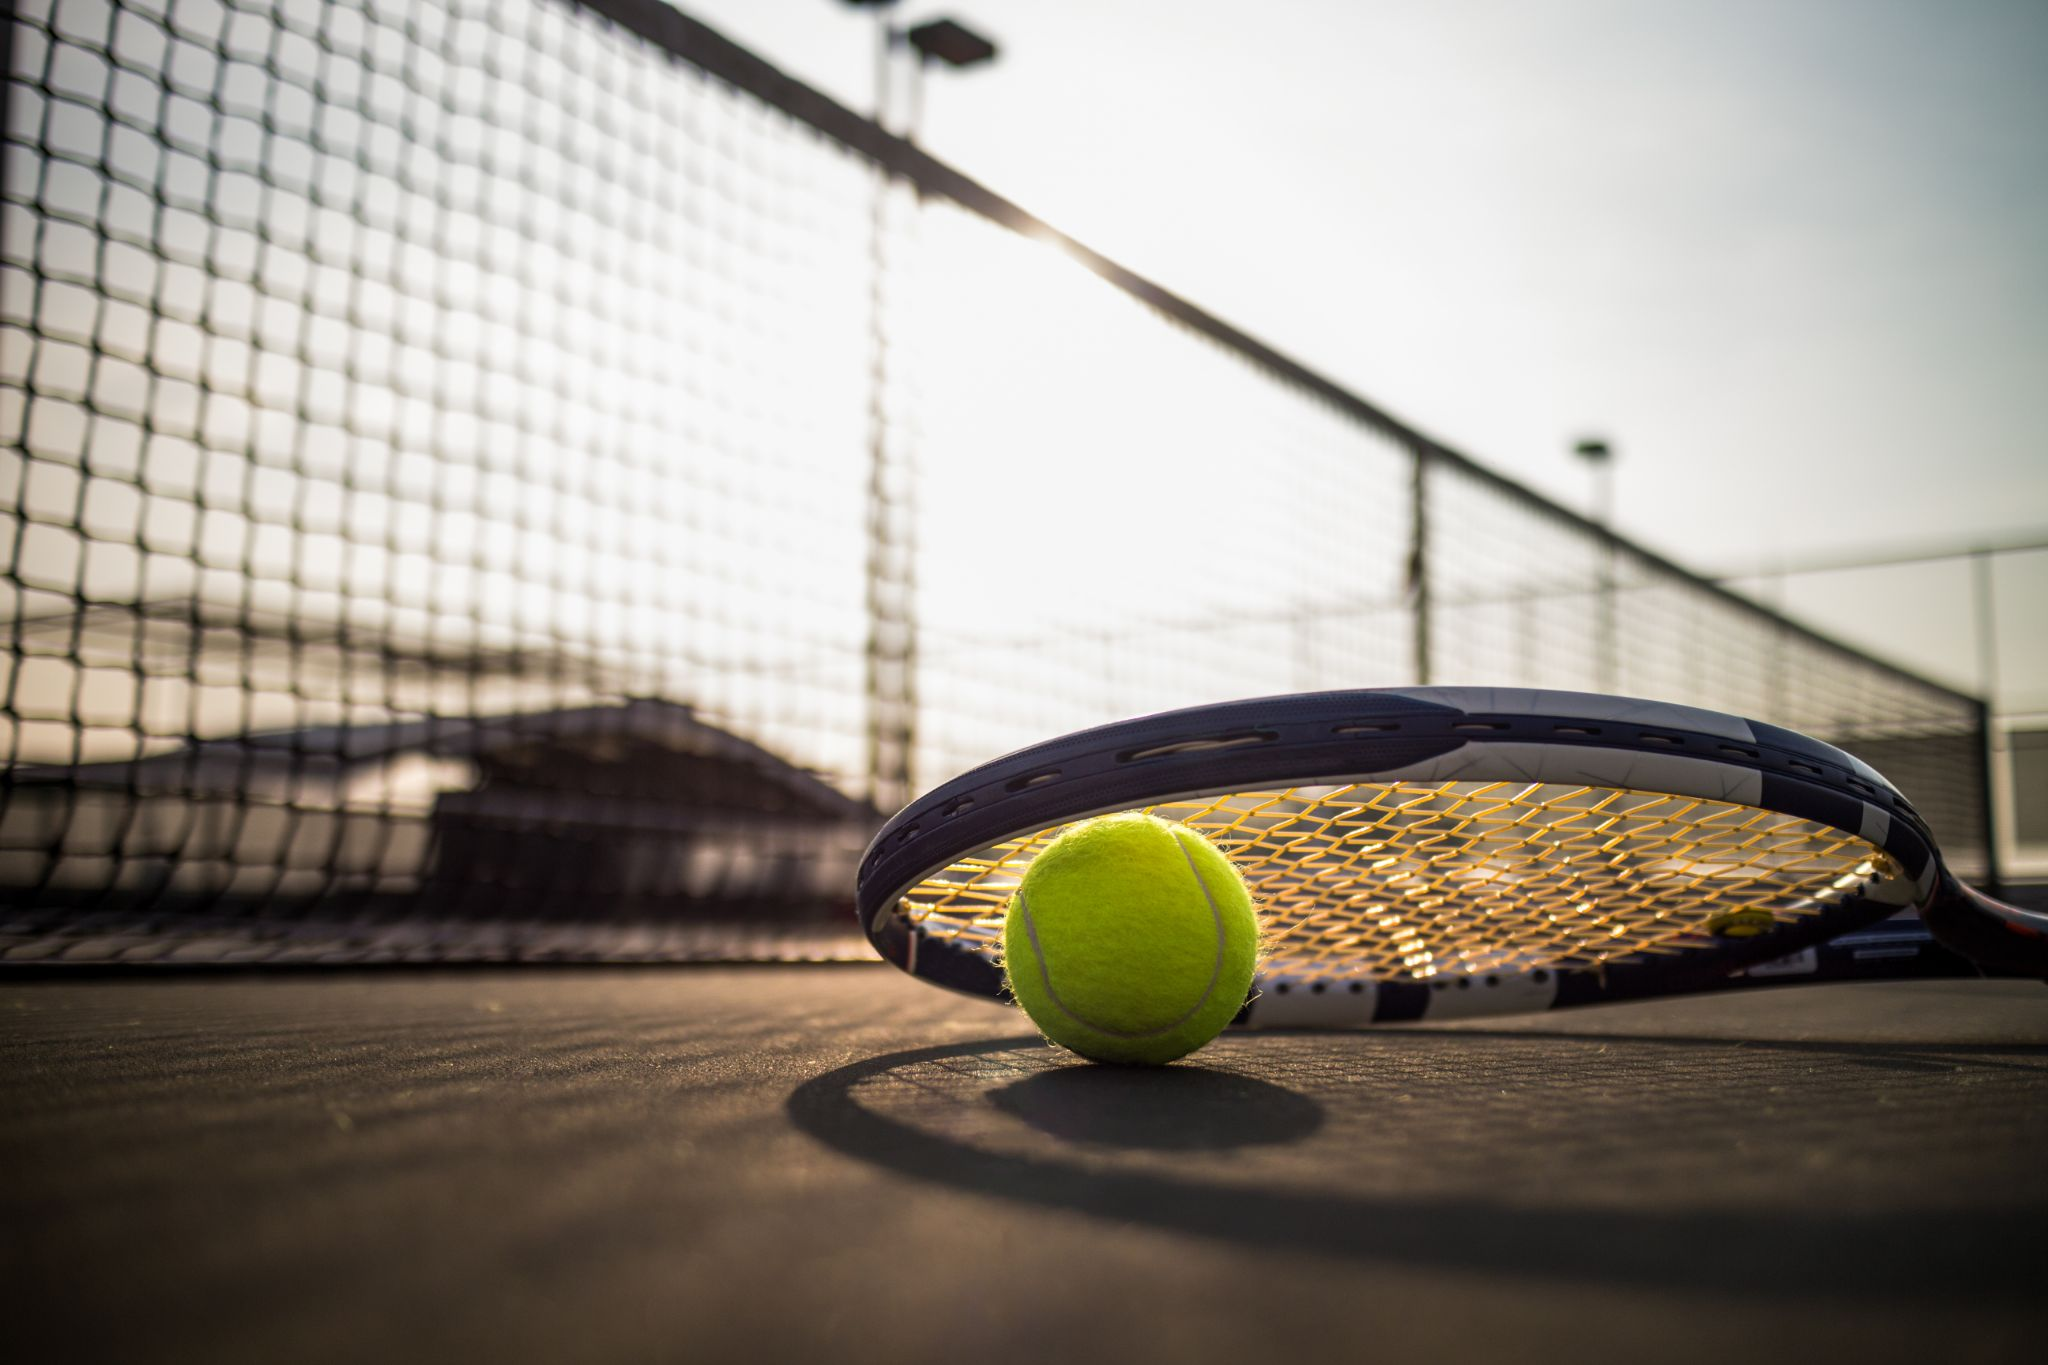 Tennis ball and racket on a court